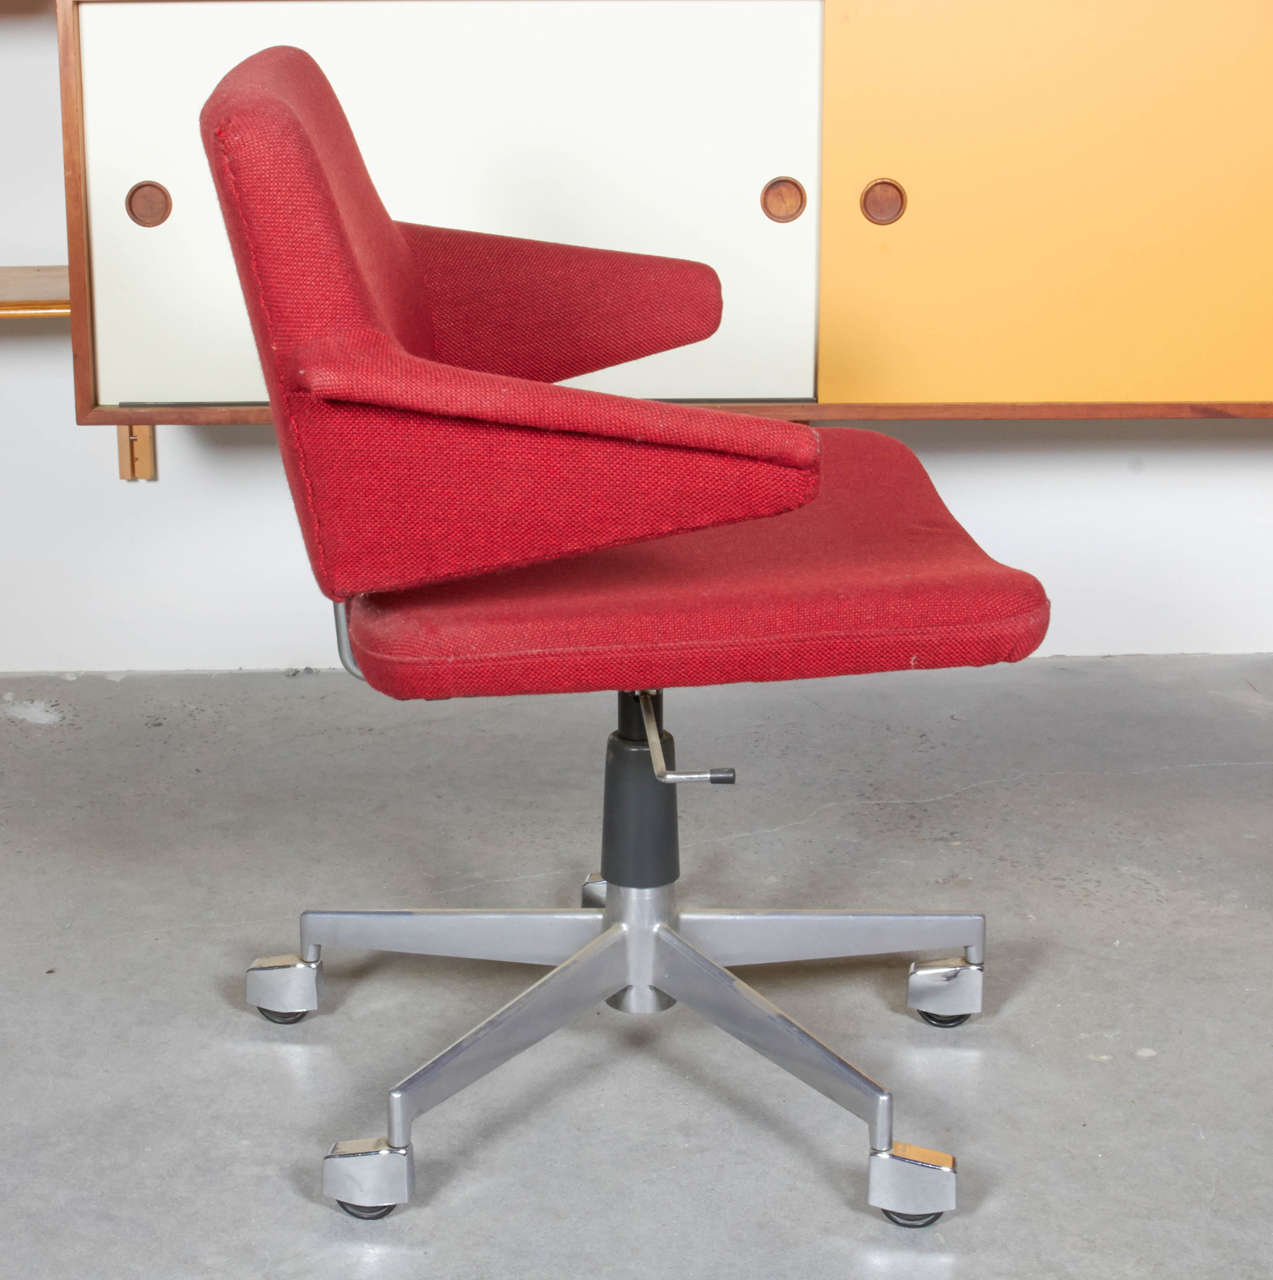 Mid-20th Century Desk Chair by Kevi on Casters, Danish